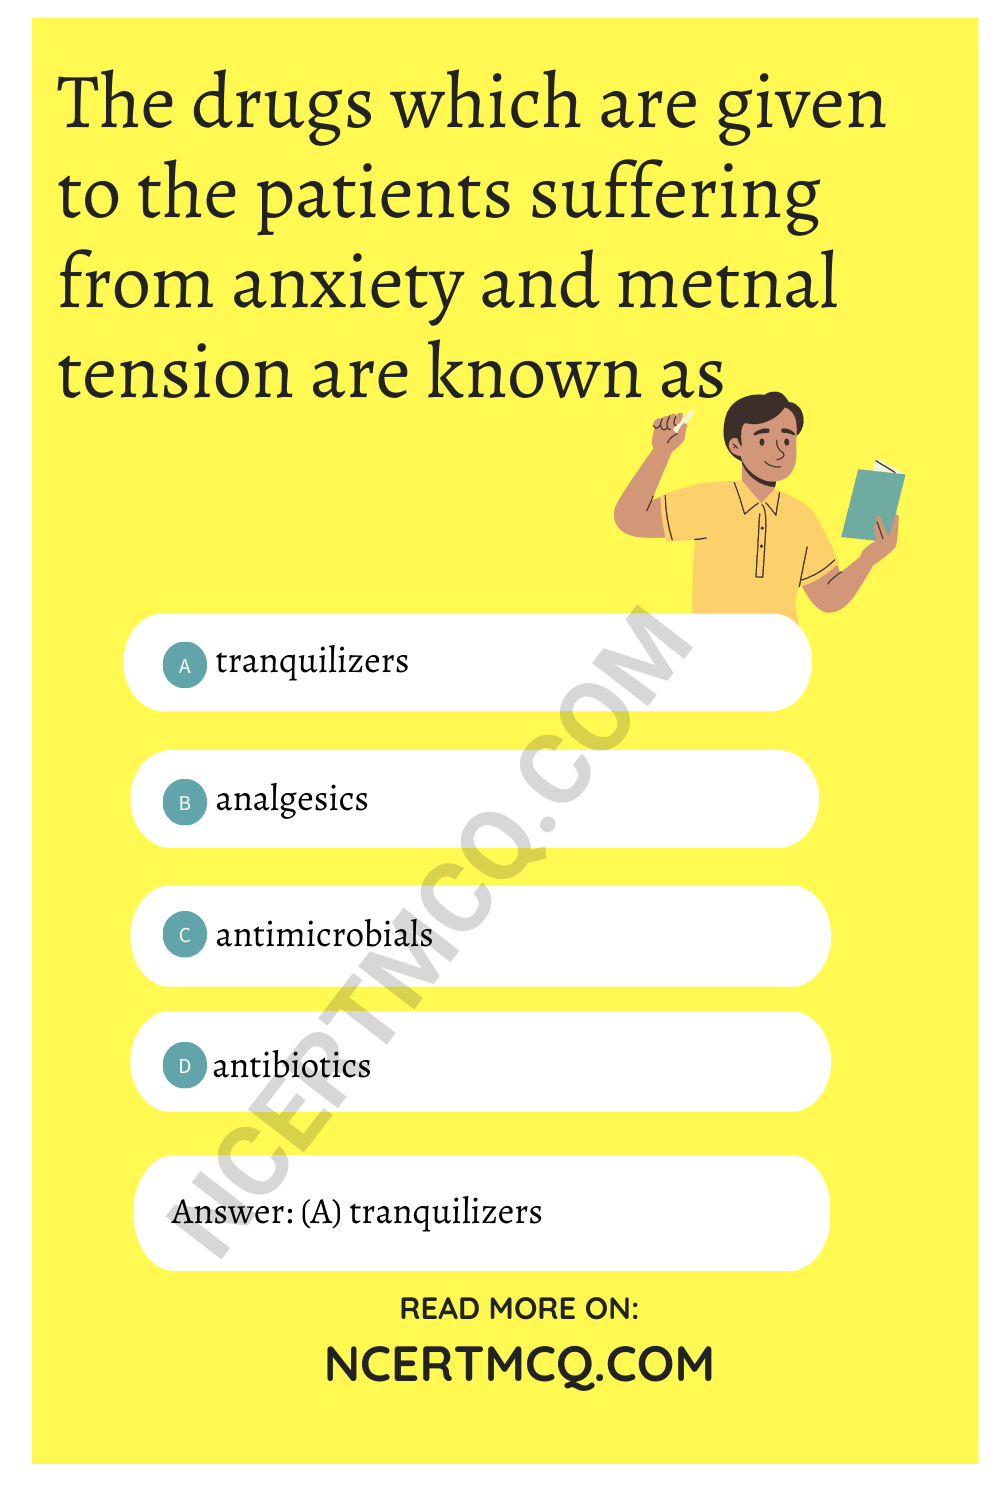 The drugs which are given to the patients suffering from anxiety and metnal tension are known as